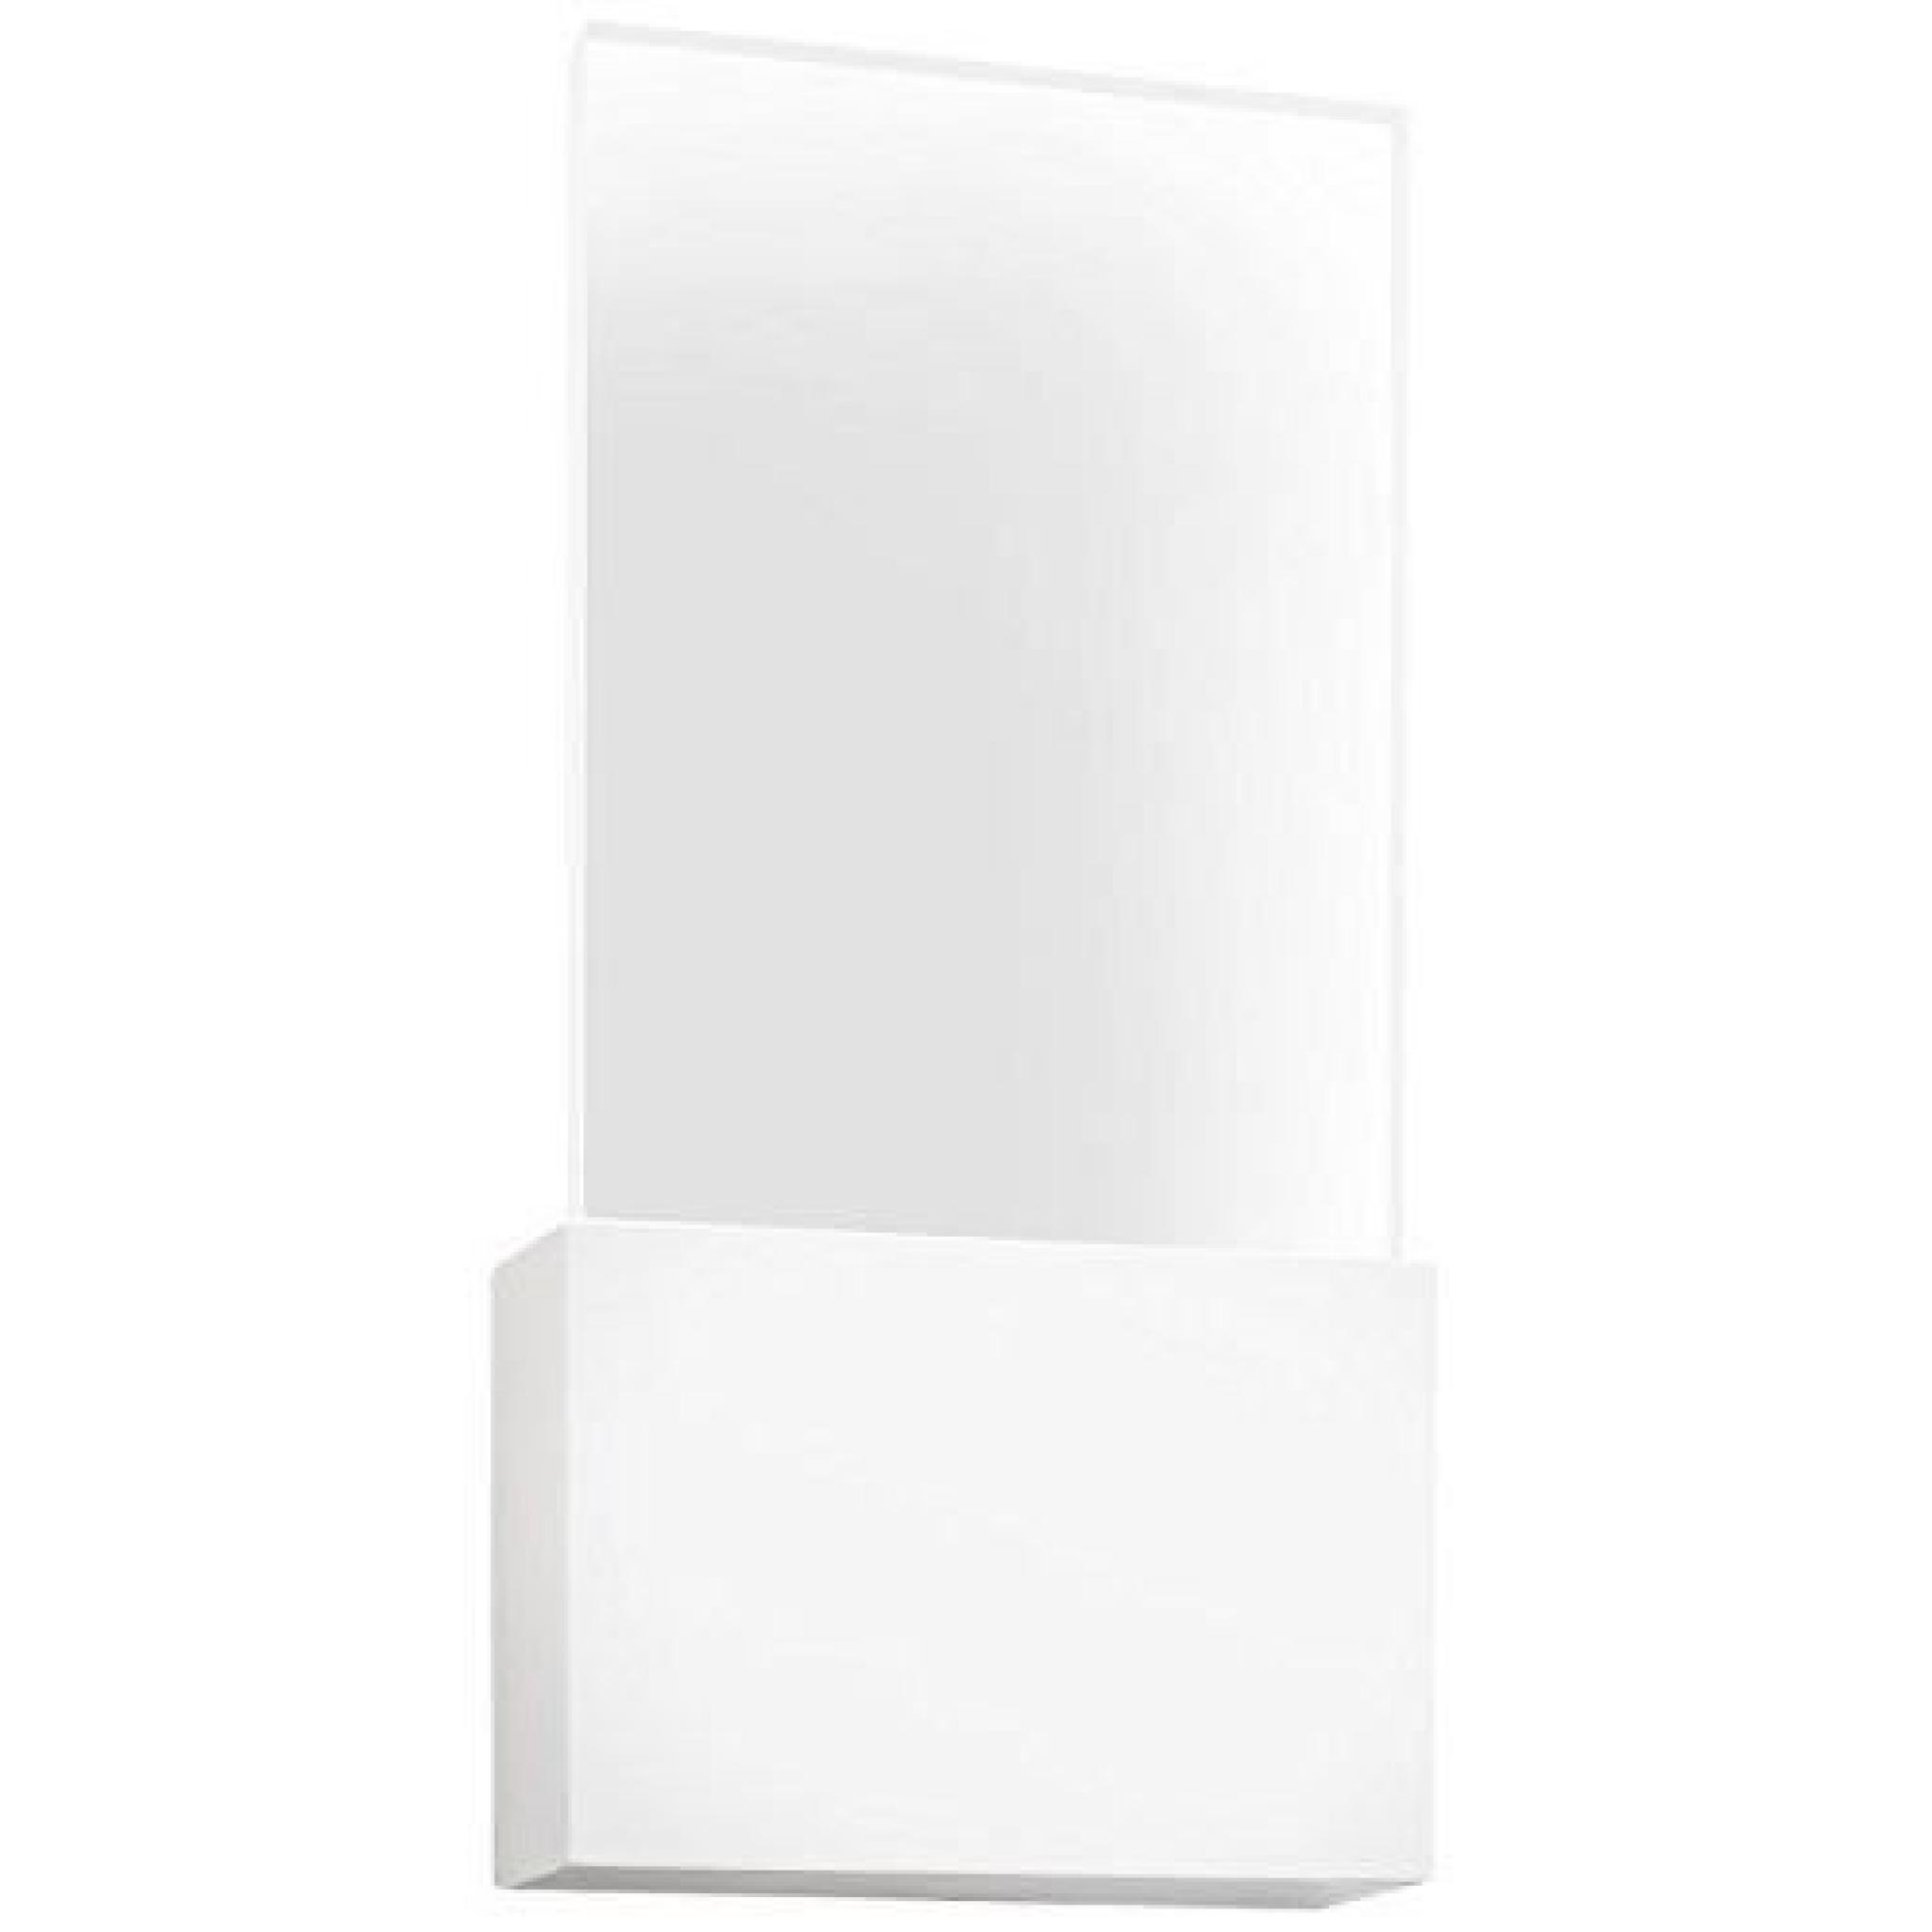 Philips 336203116 Watch Applique Murale LED 2,5 W 230 V